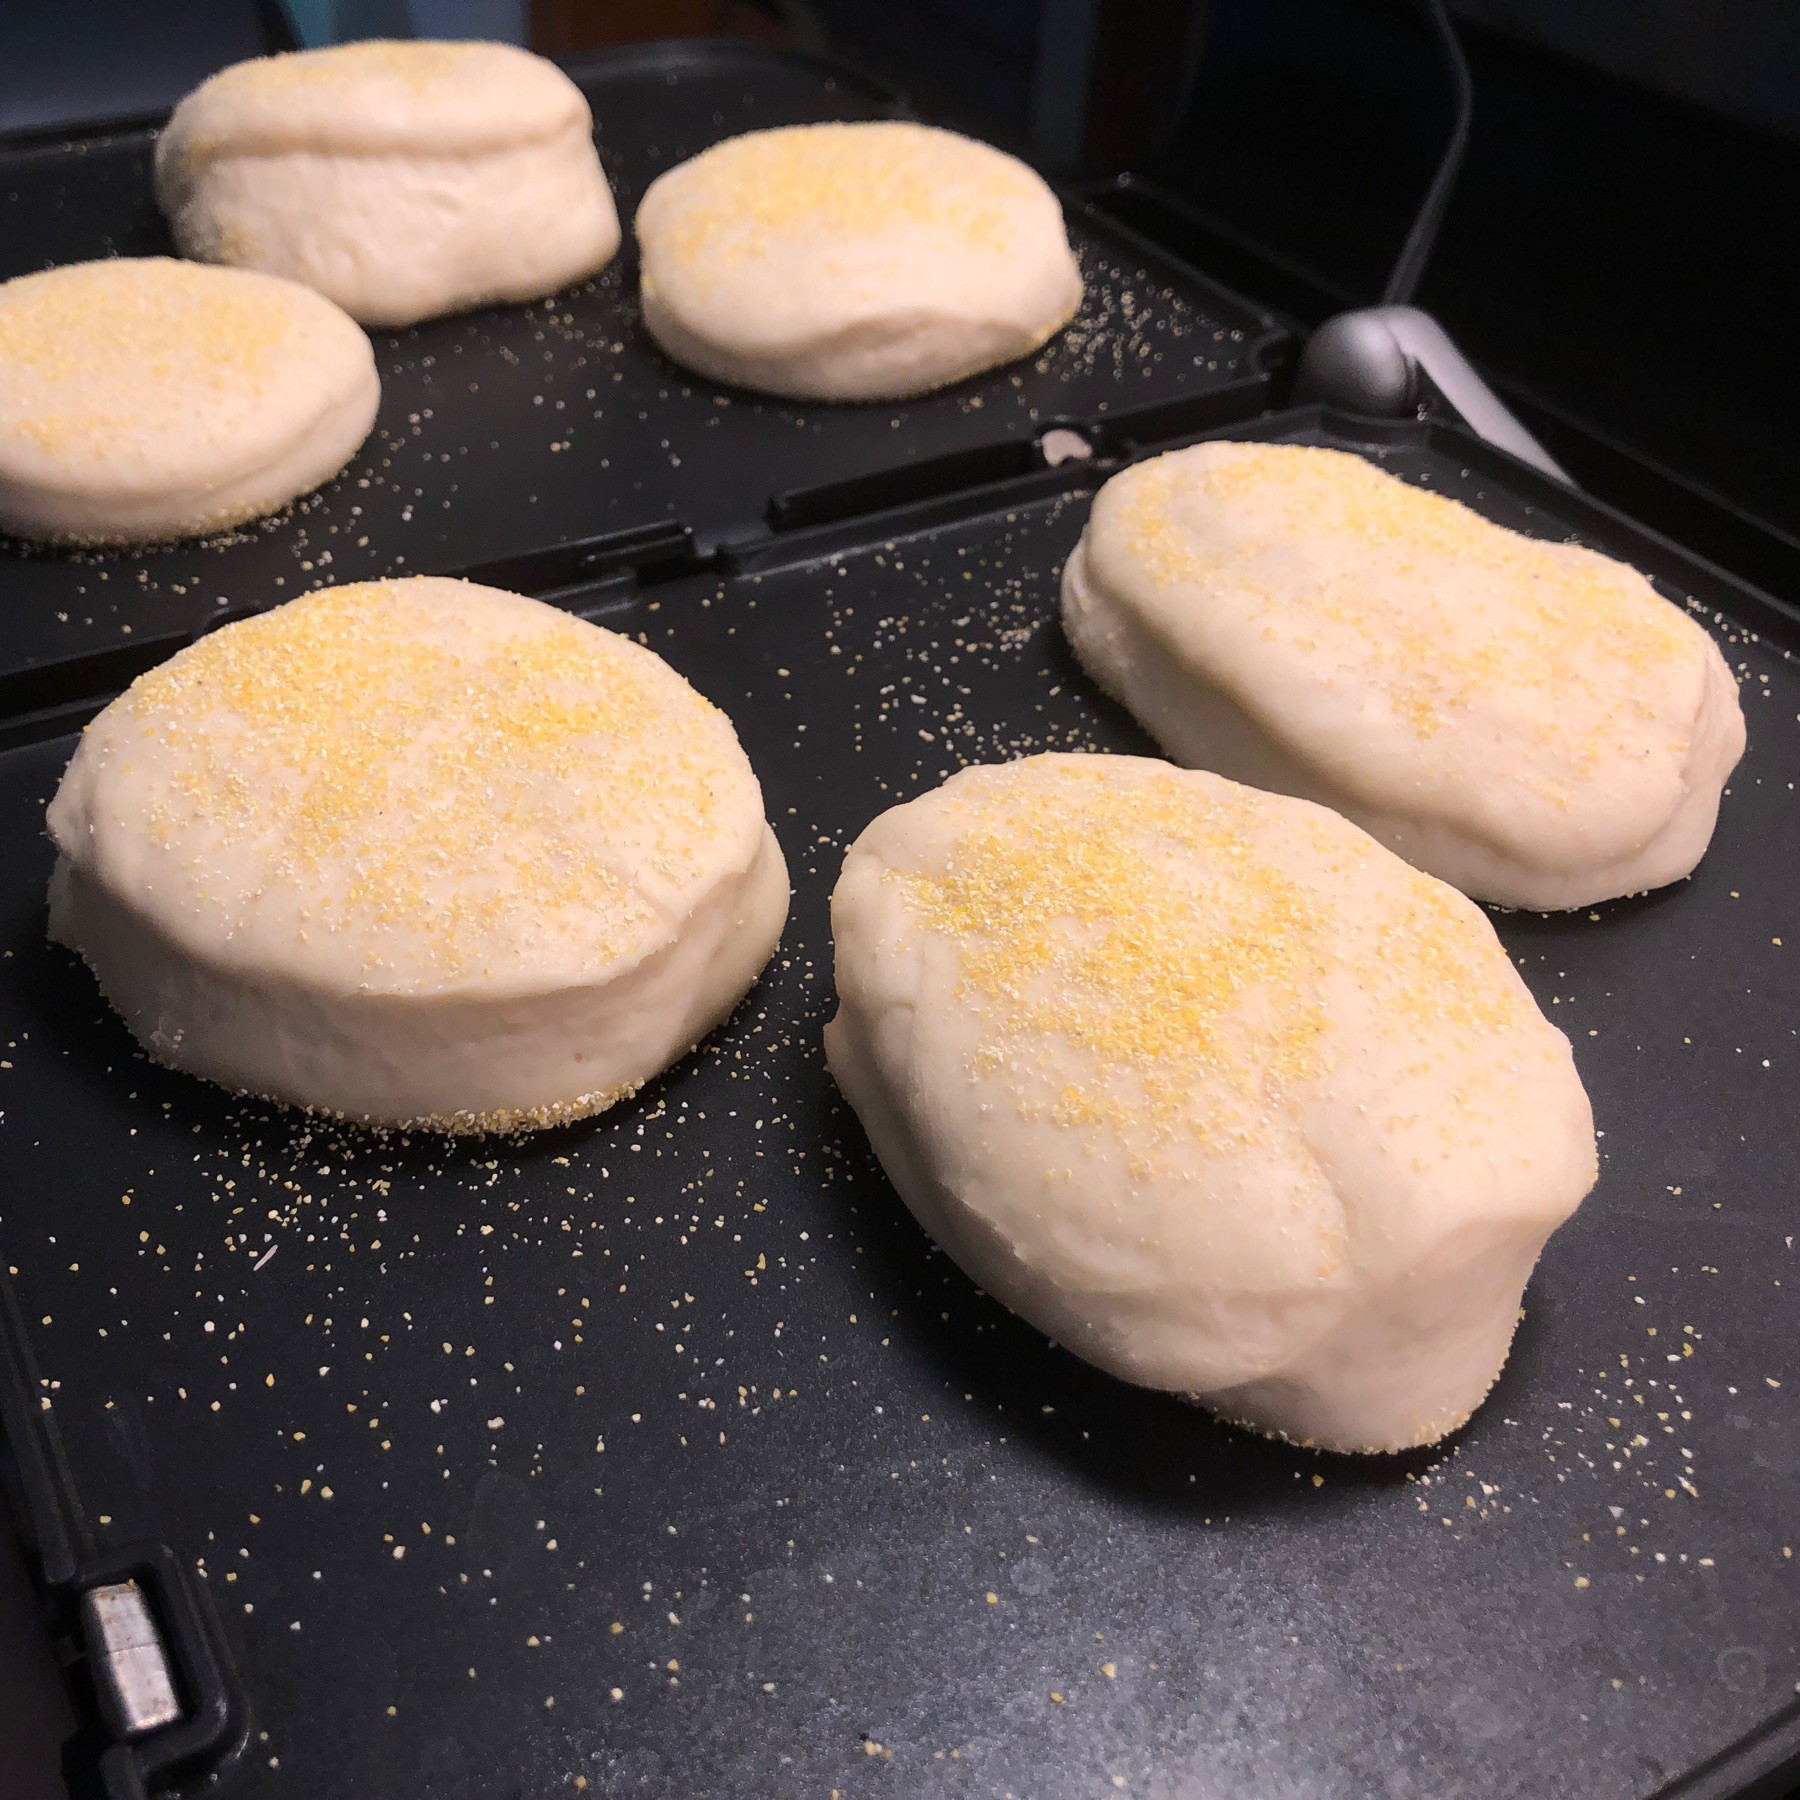 English muffins cooking on grill.